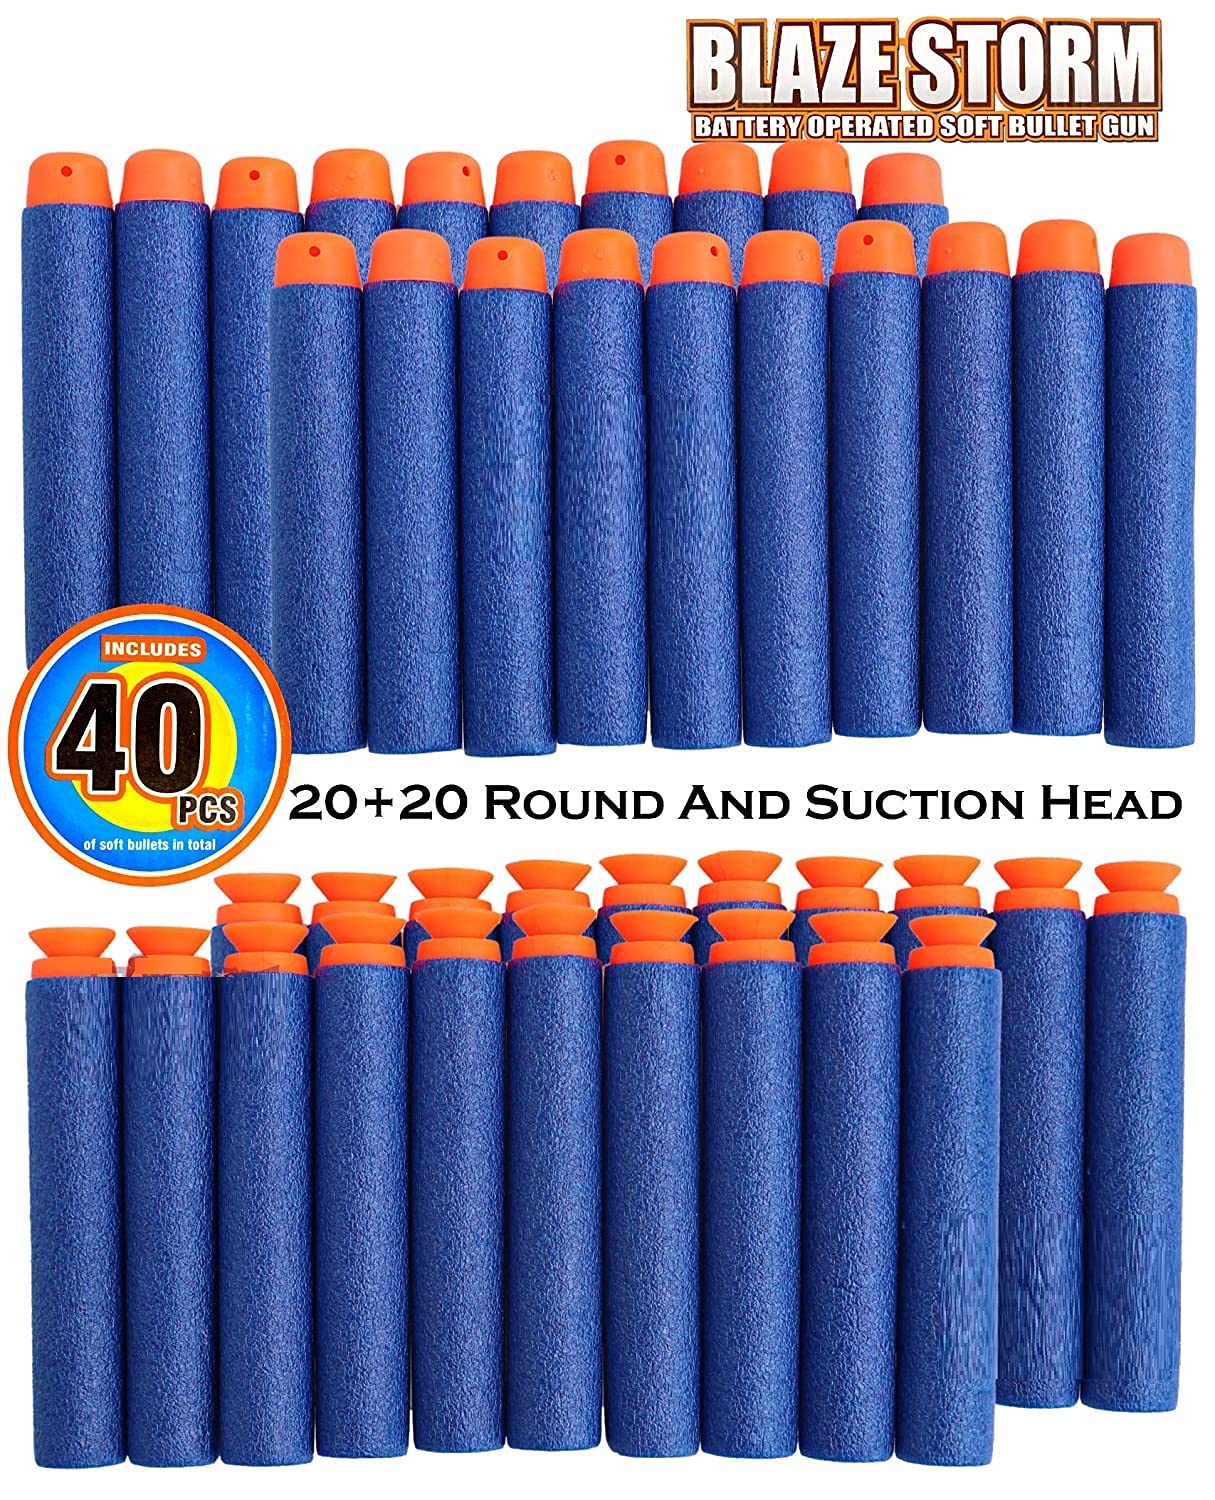 Funrally® Big Size Blaze Storm Battery Operated Soft Bullet Gun Comes with 40 Safe Soft Foam Bullets (Multi-Colour)